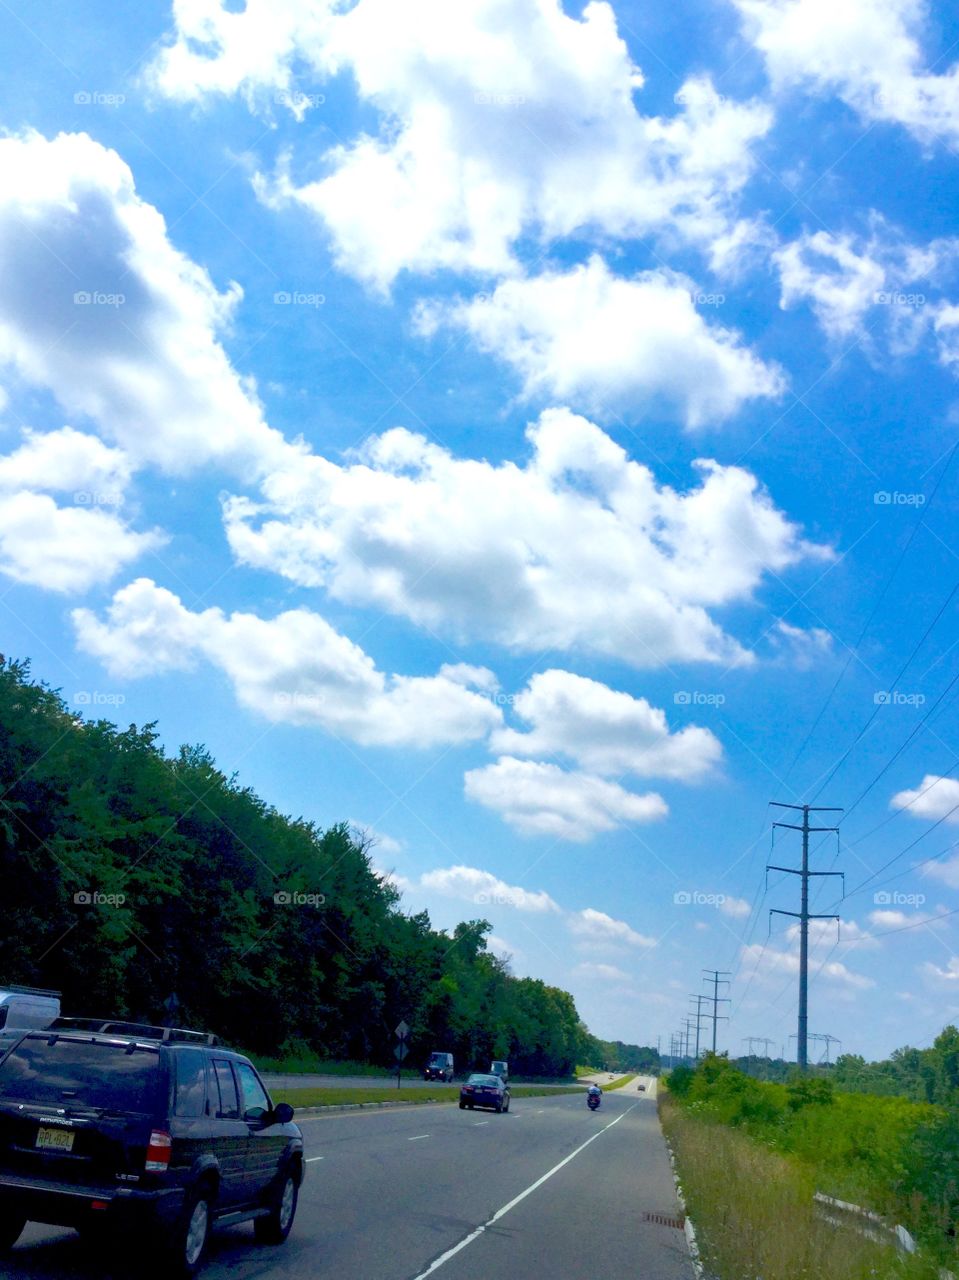 Sky and Road